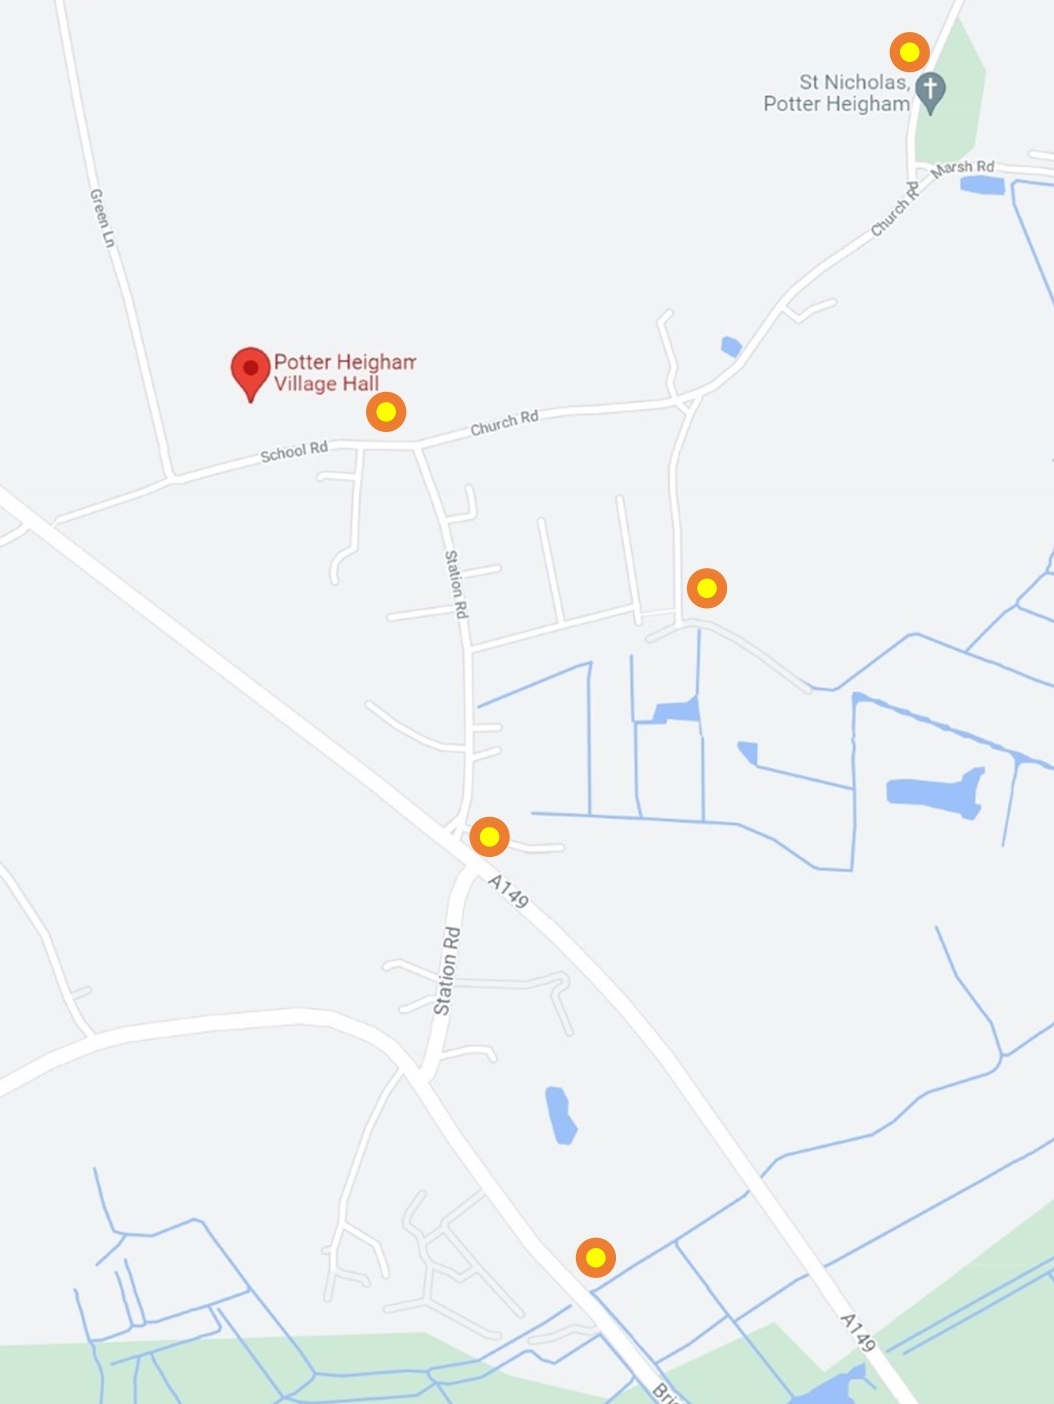 Map showing the location of dog waste bins in Potter Heigham